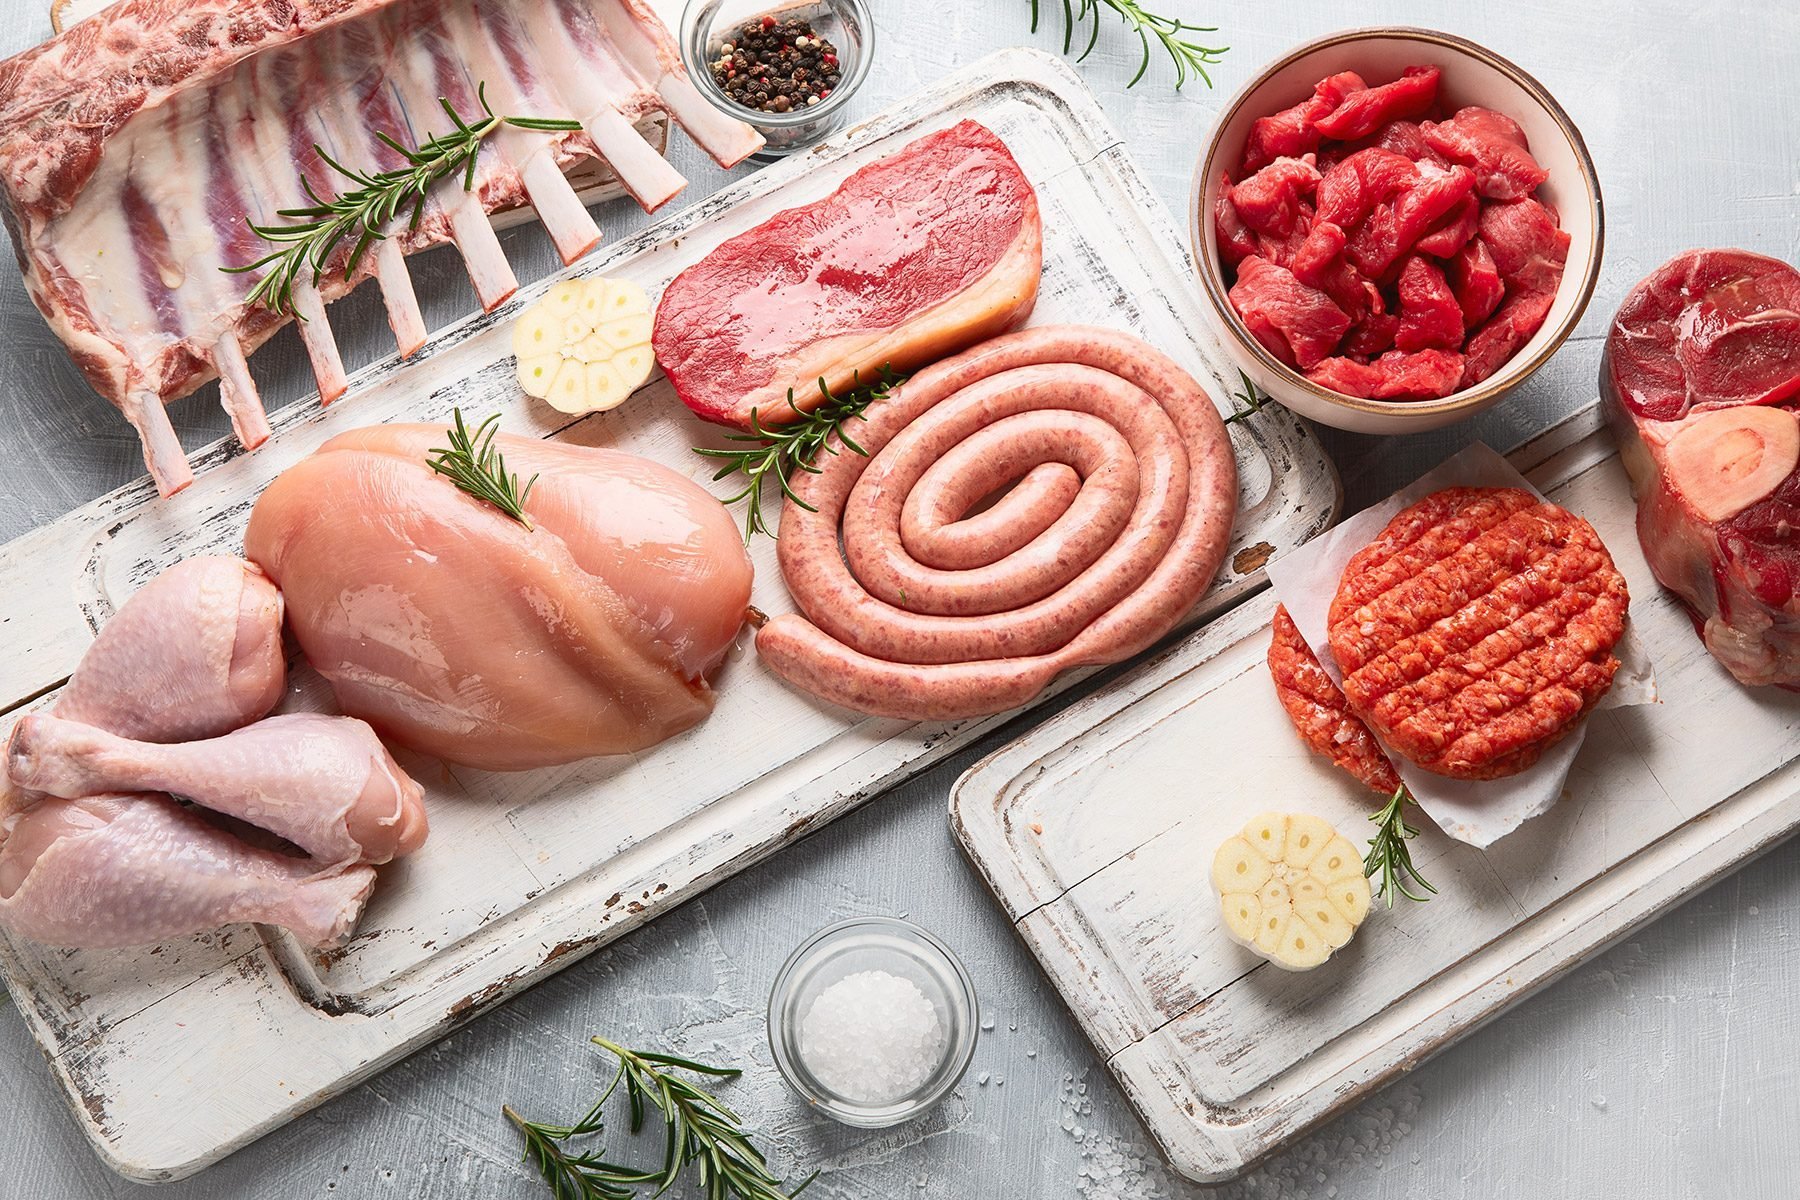 The 5 Healthiest Meats To Eat—and 2 To Avoid, According To Experts